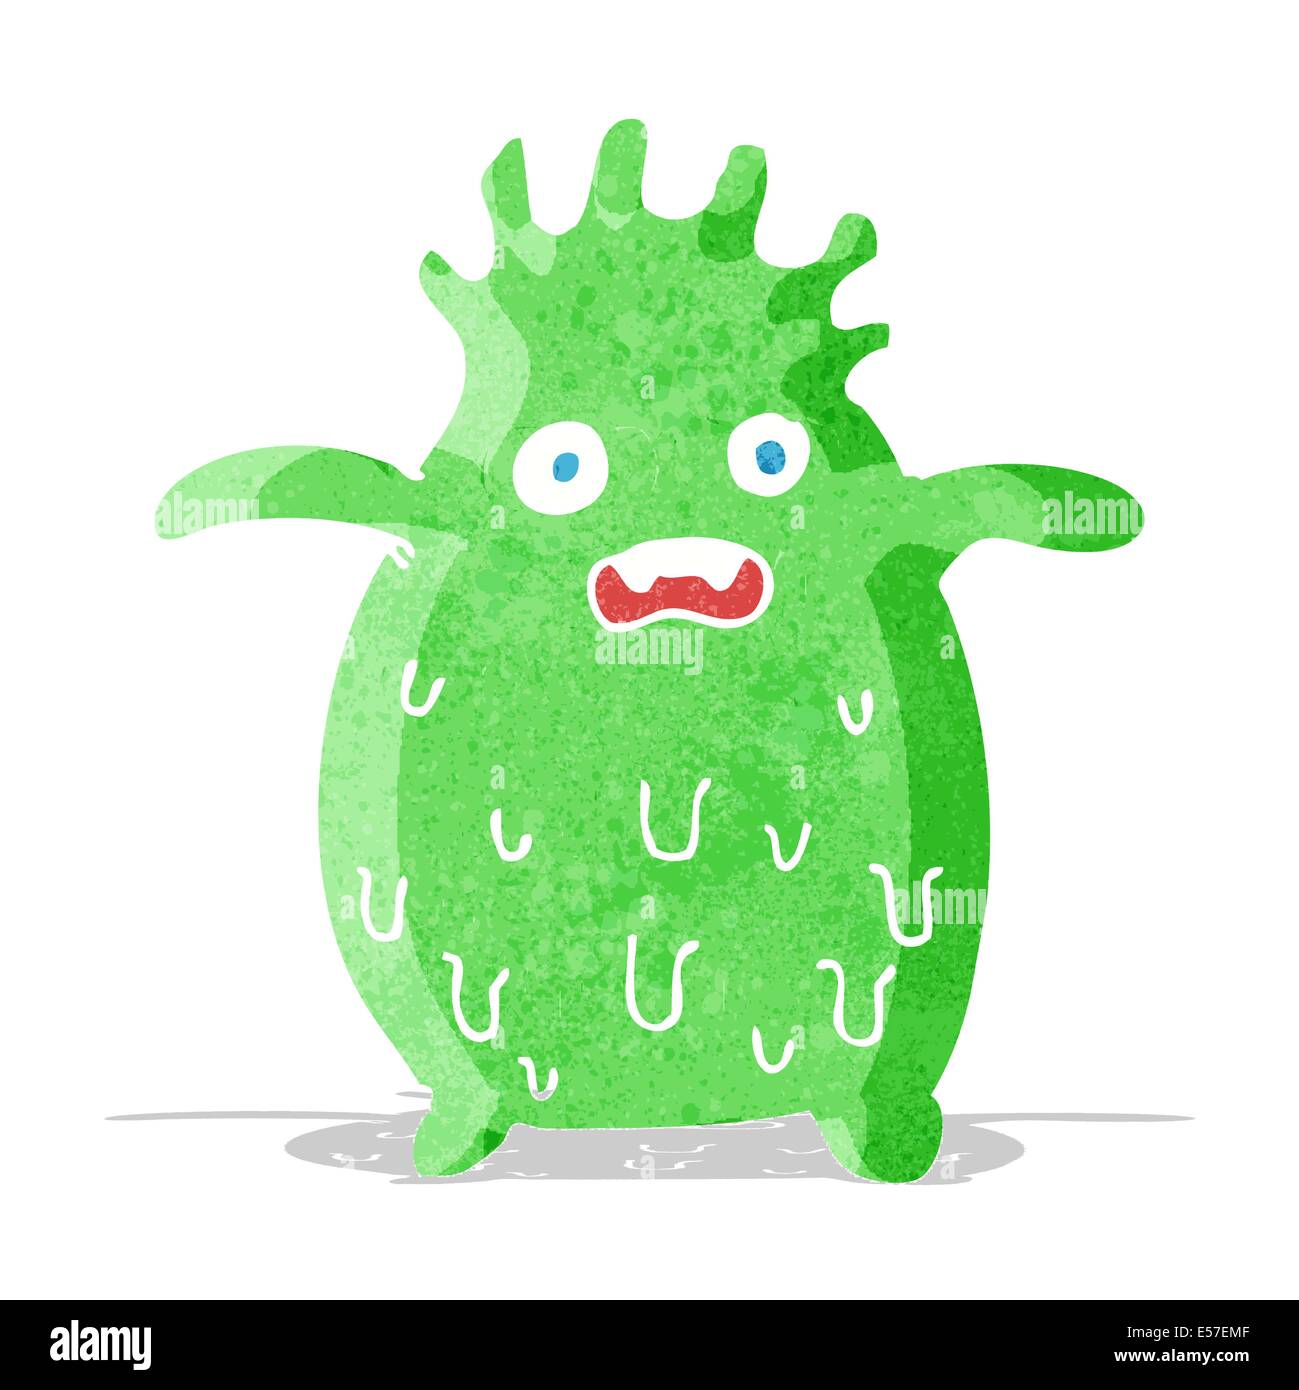 Cute slime monster for kids coloring book Vector Image